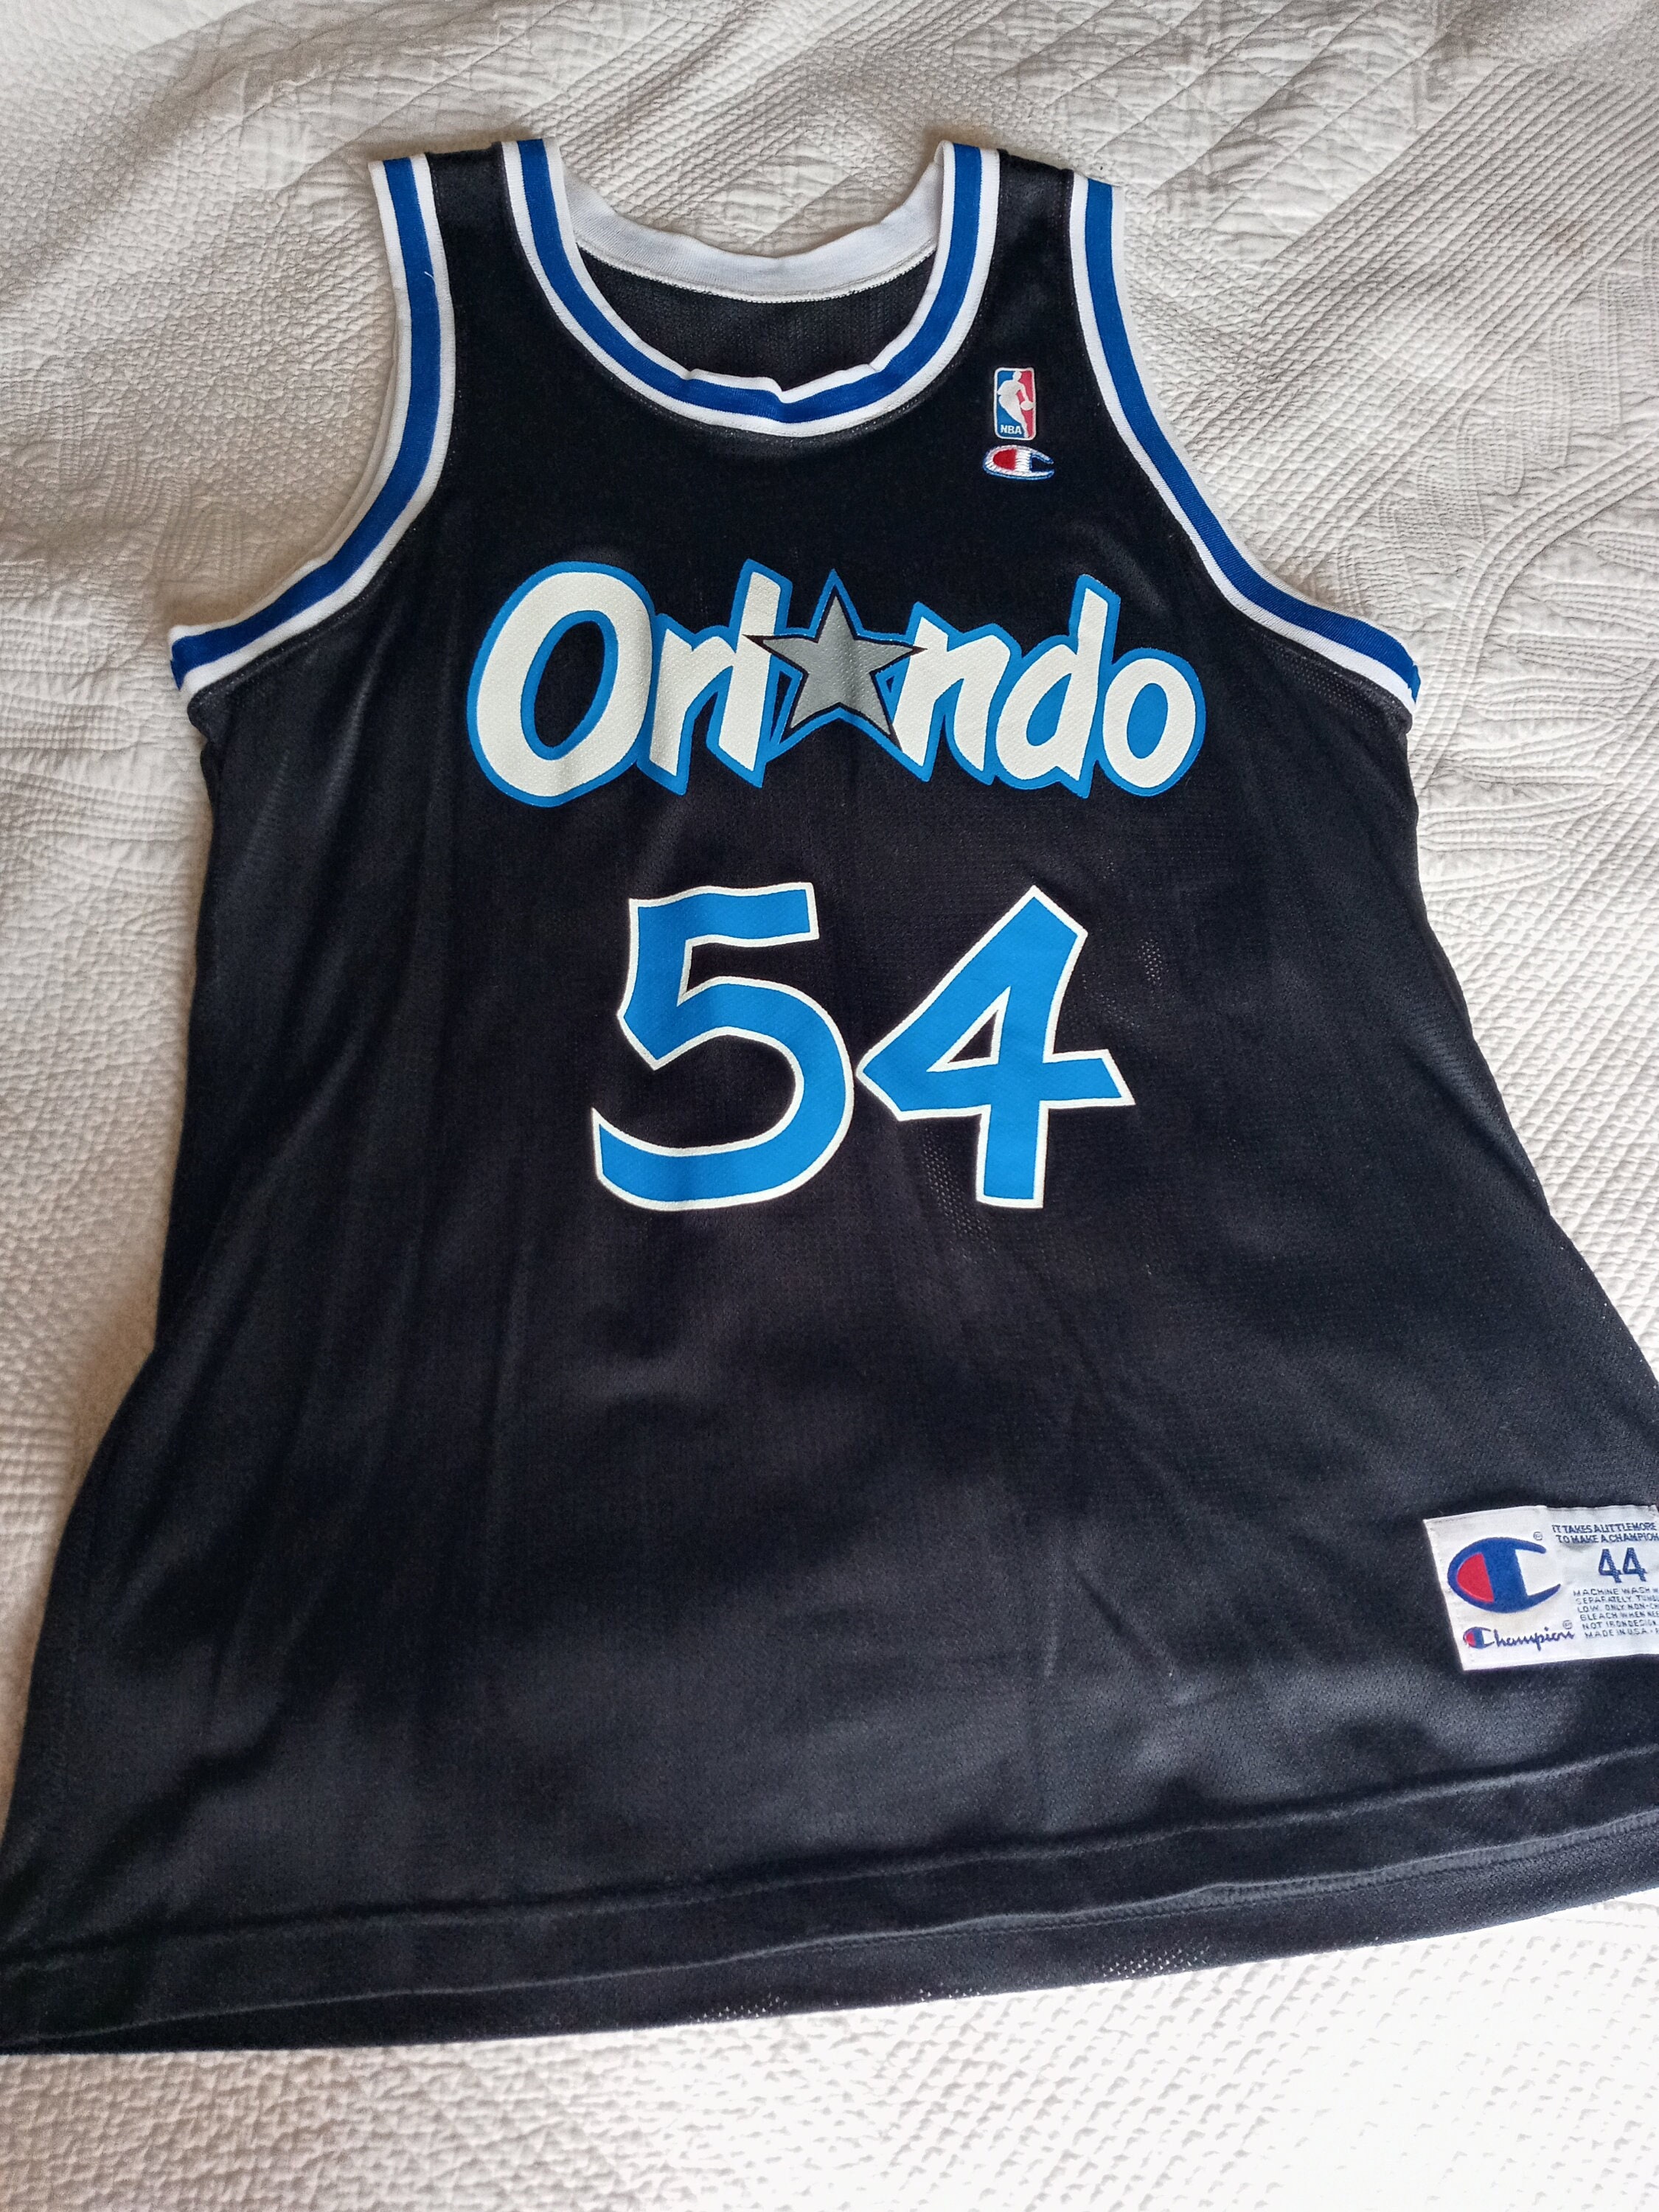 horace grant jersey products for sale